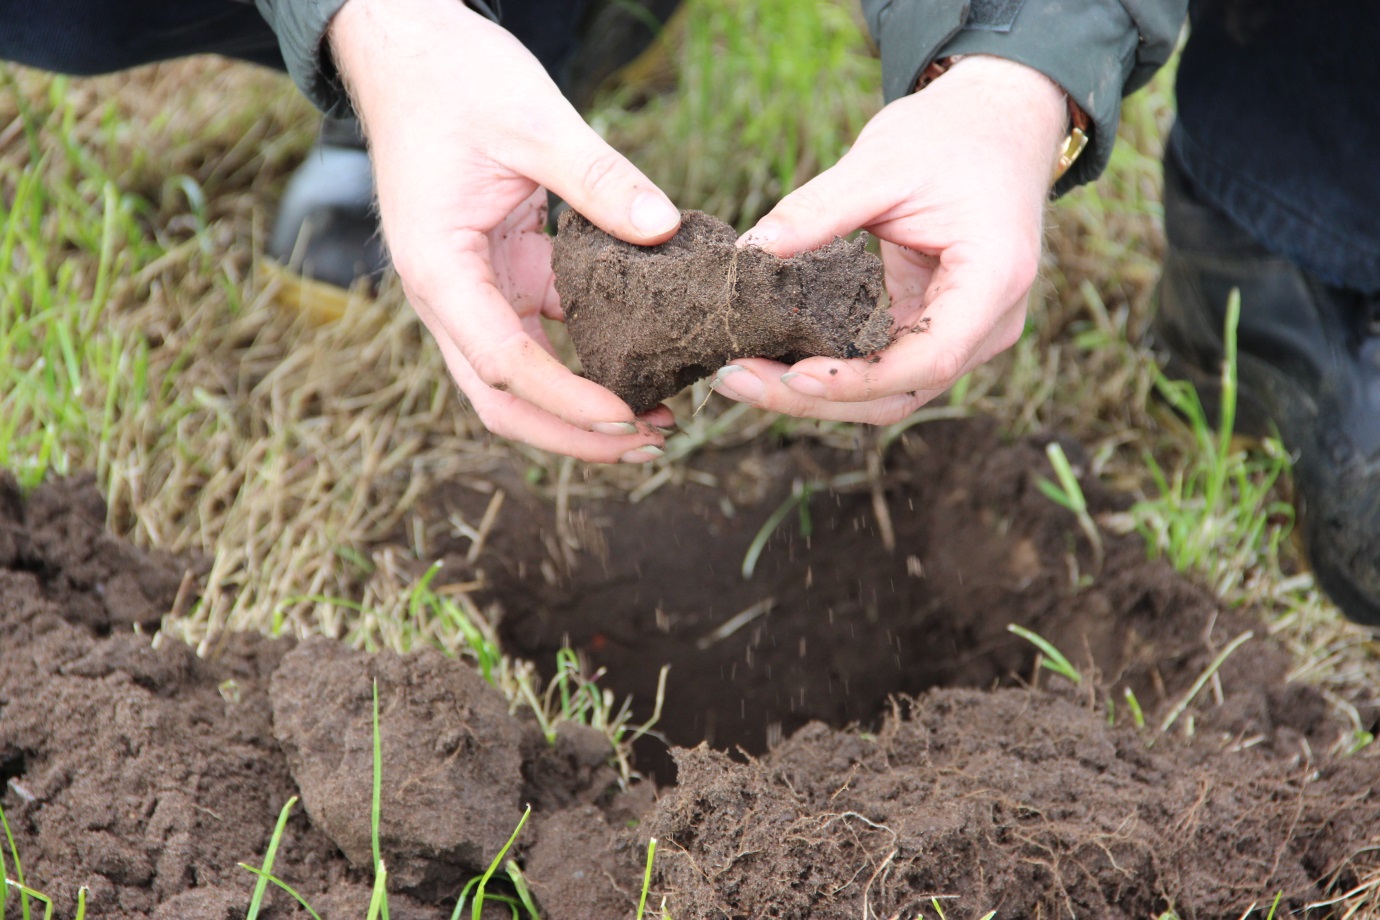 A friable soil with good numbers of earthworms and the right balance of nutrients combines the physical, biological and chemical factors needed for a healthy soil and a healthy crop.